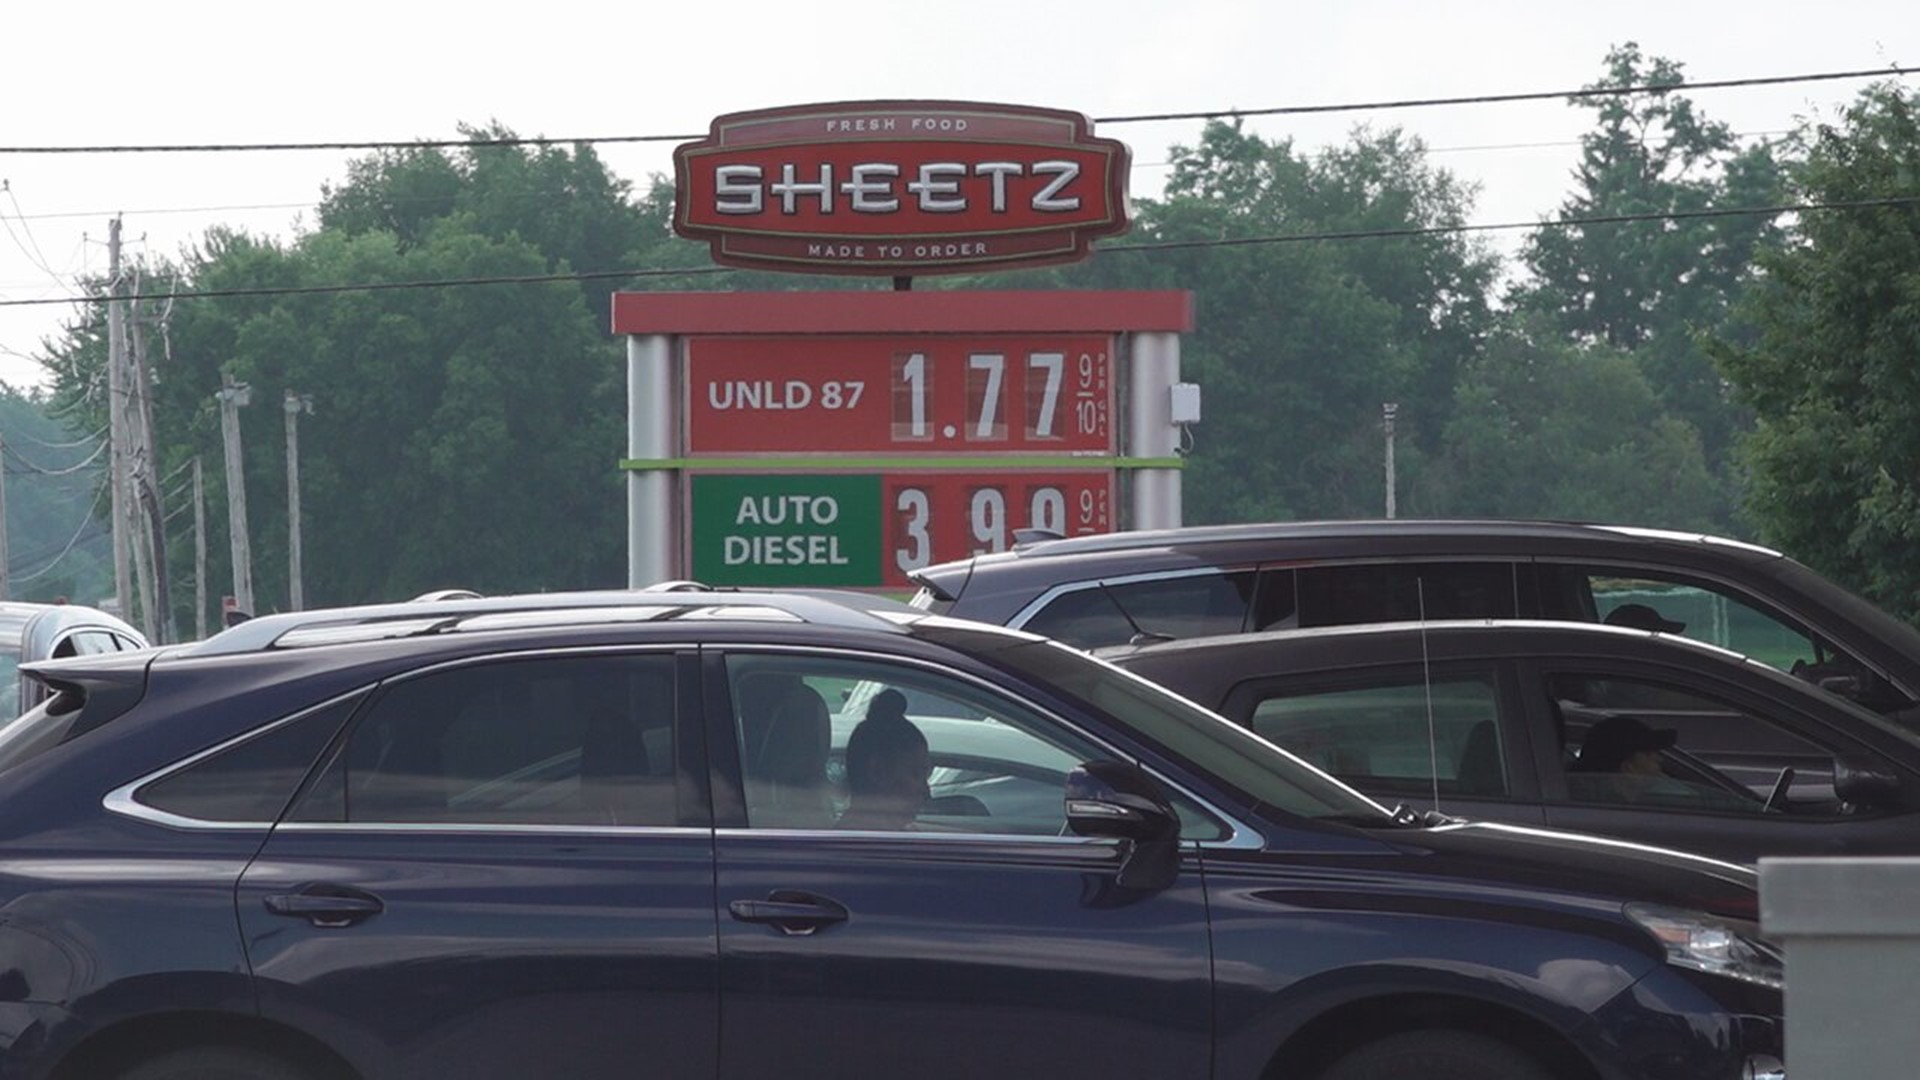 Pennsylvania drivers swarm Sheetz for 4th of July gas discount